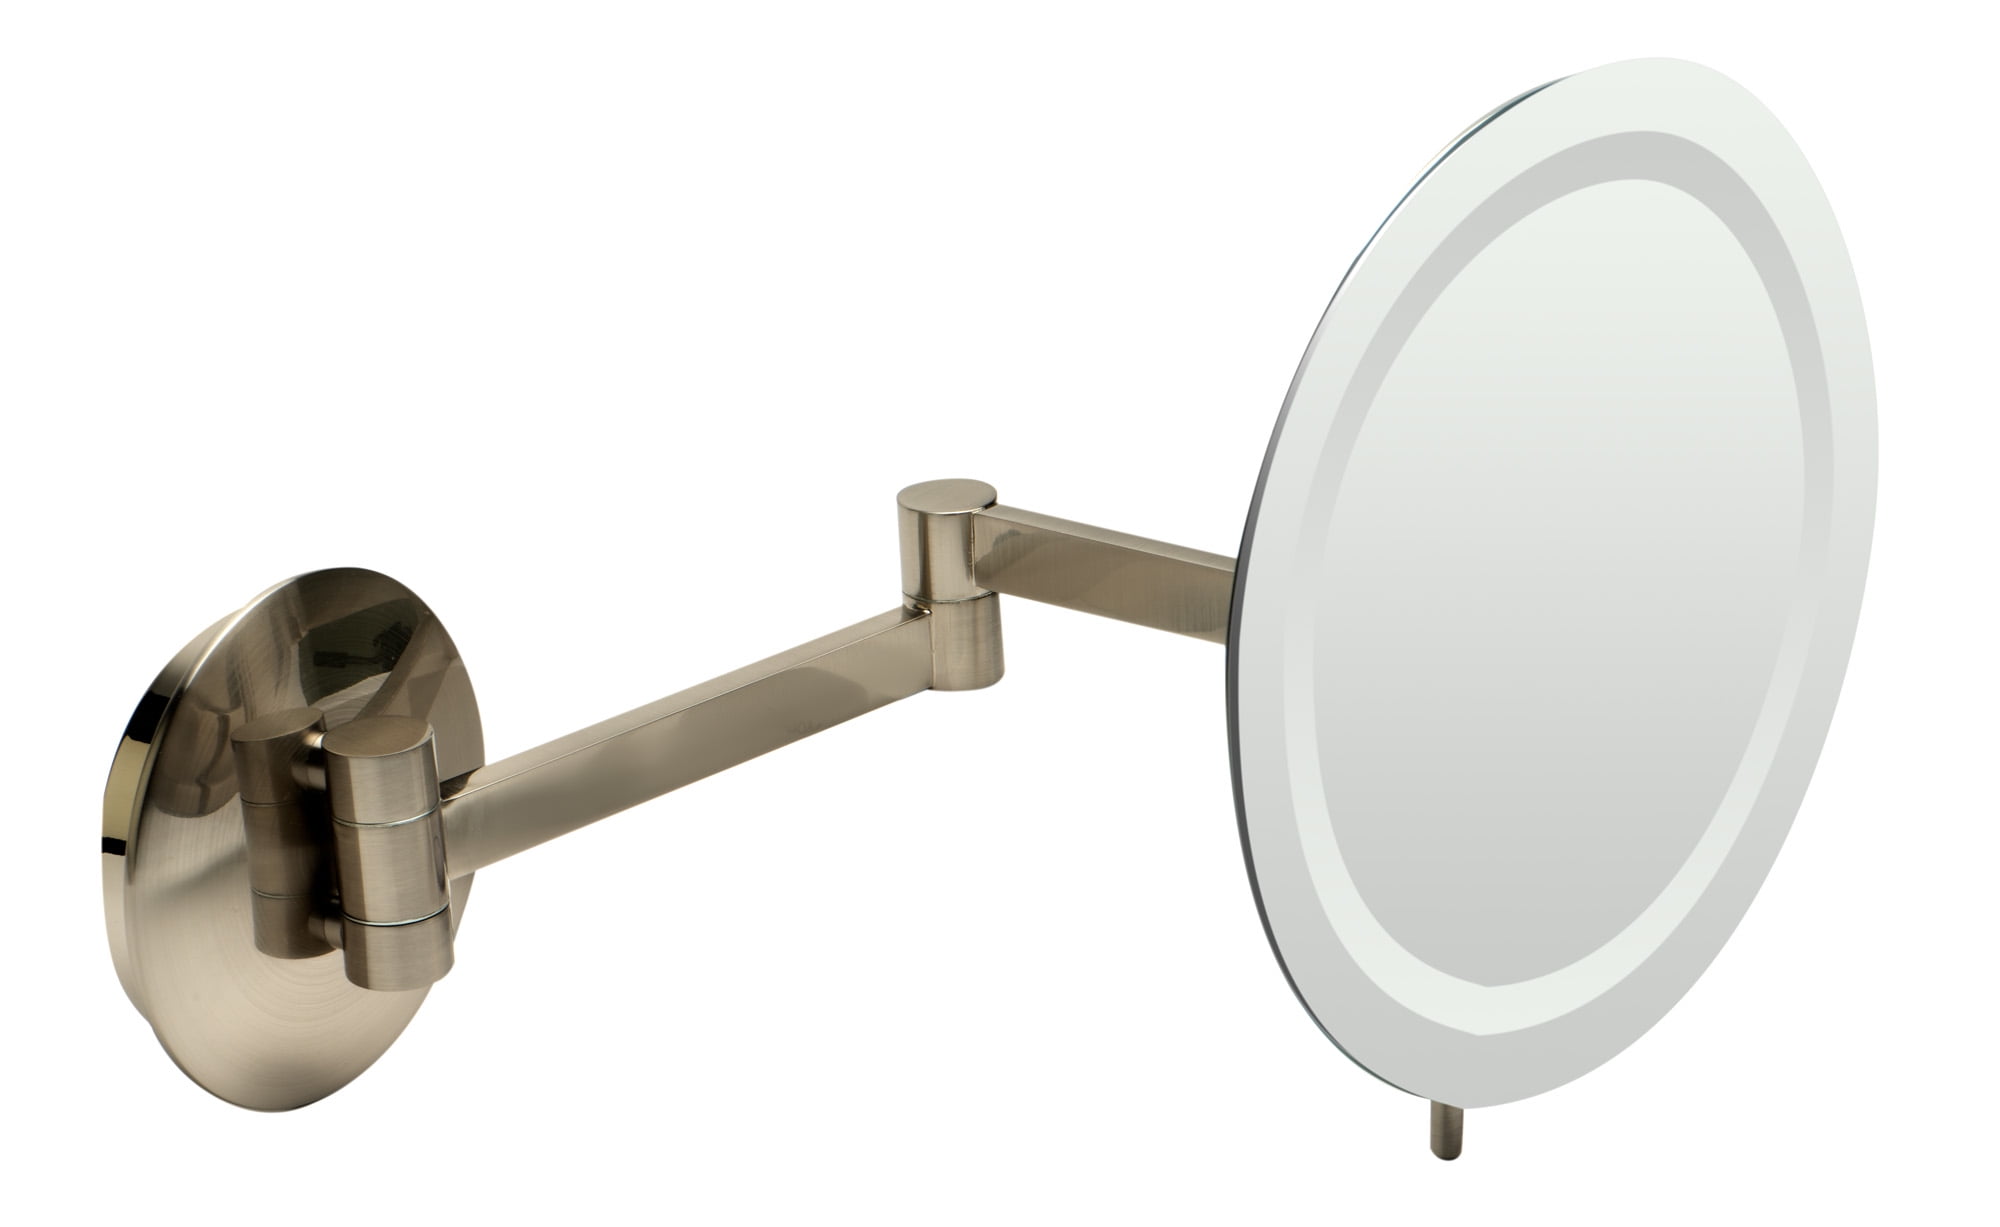 Abm9wled-bn 9 In. Wall Mount Round 5x Magnifying Cosmetic Mirror With Light - Brushed Nickel